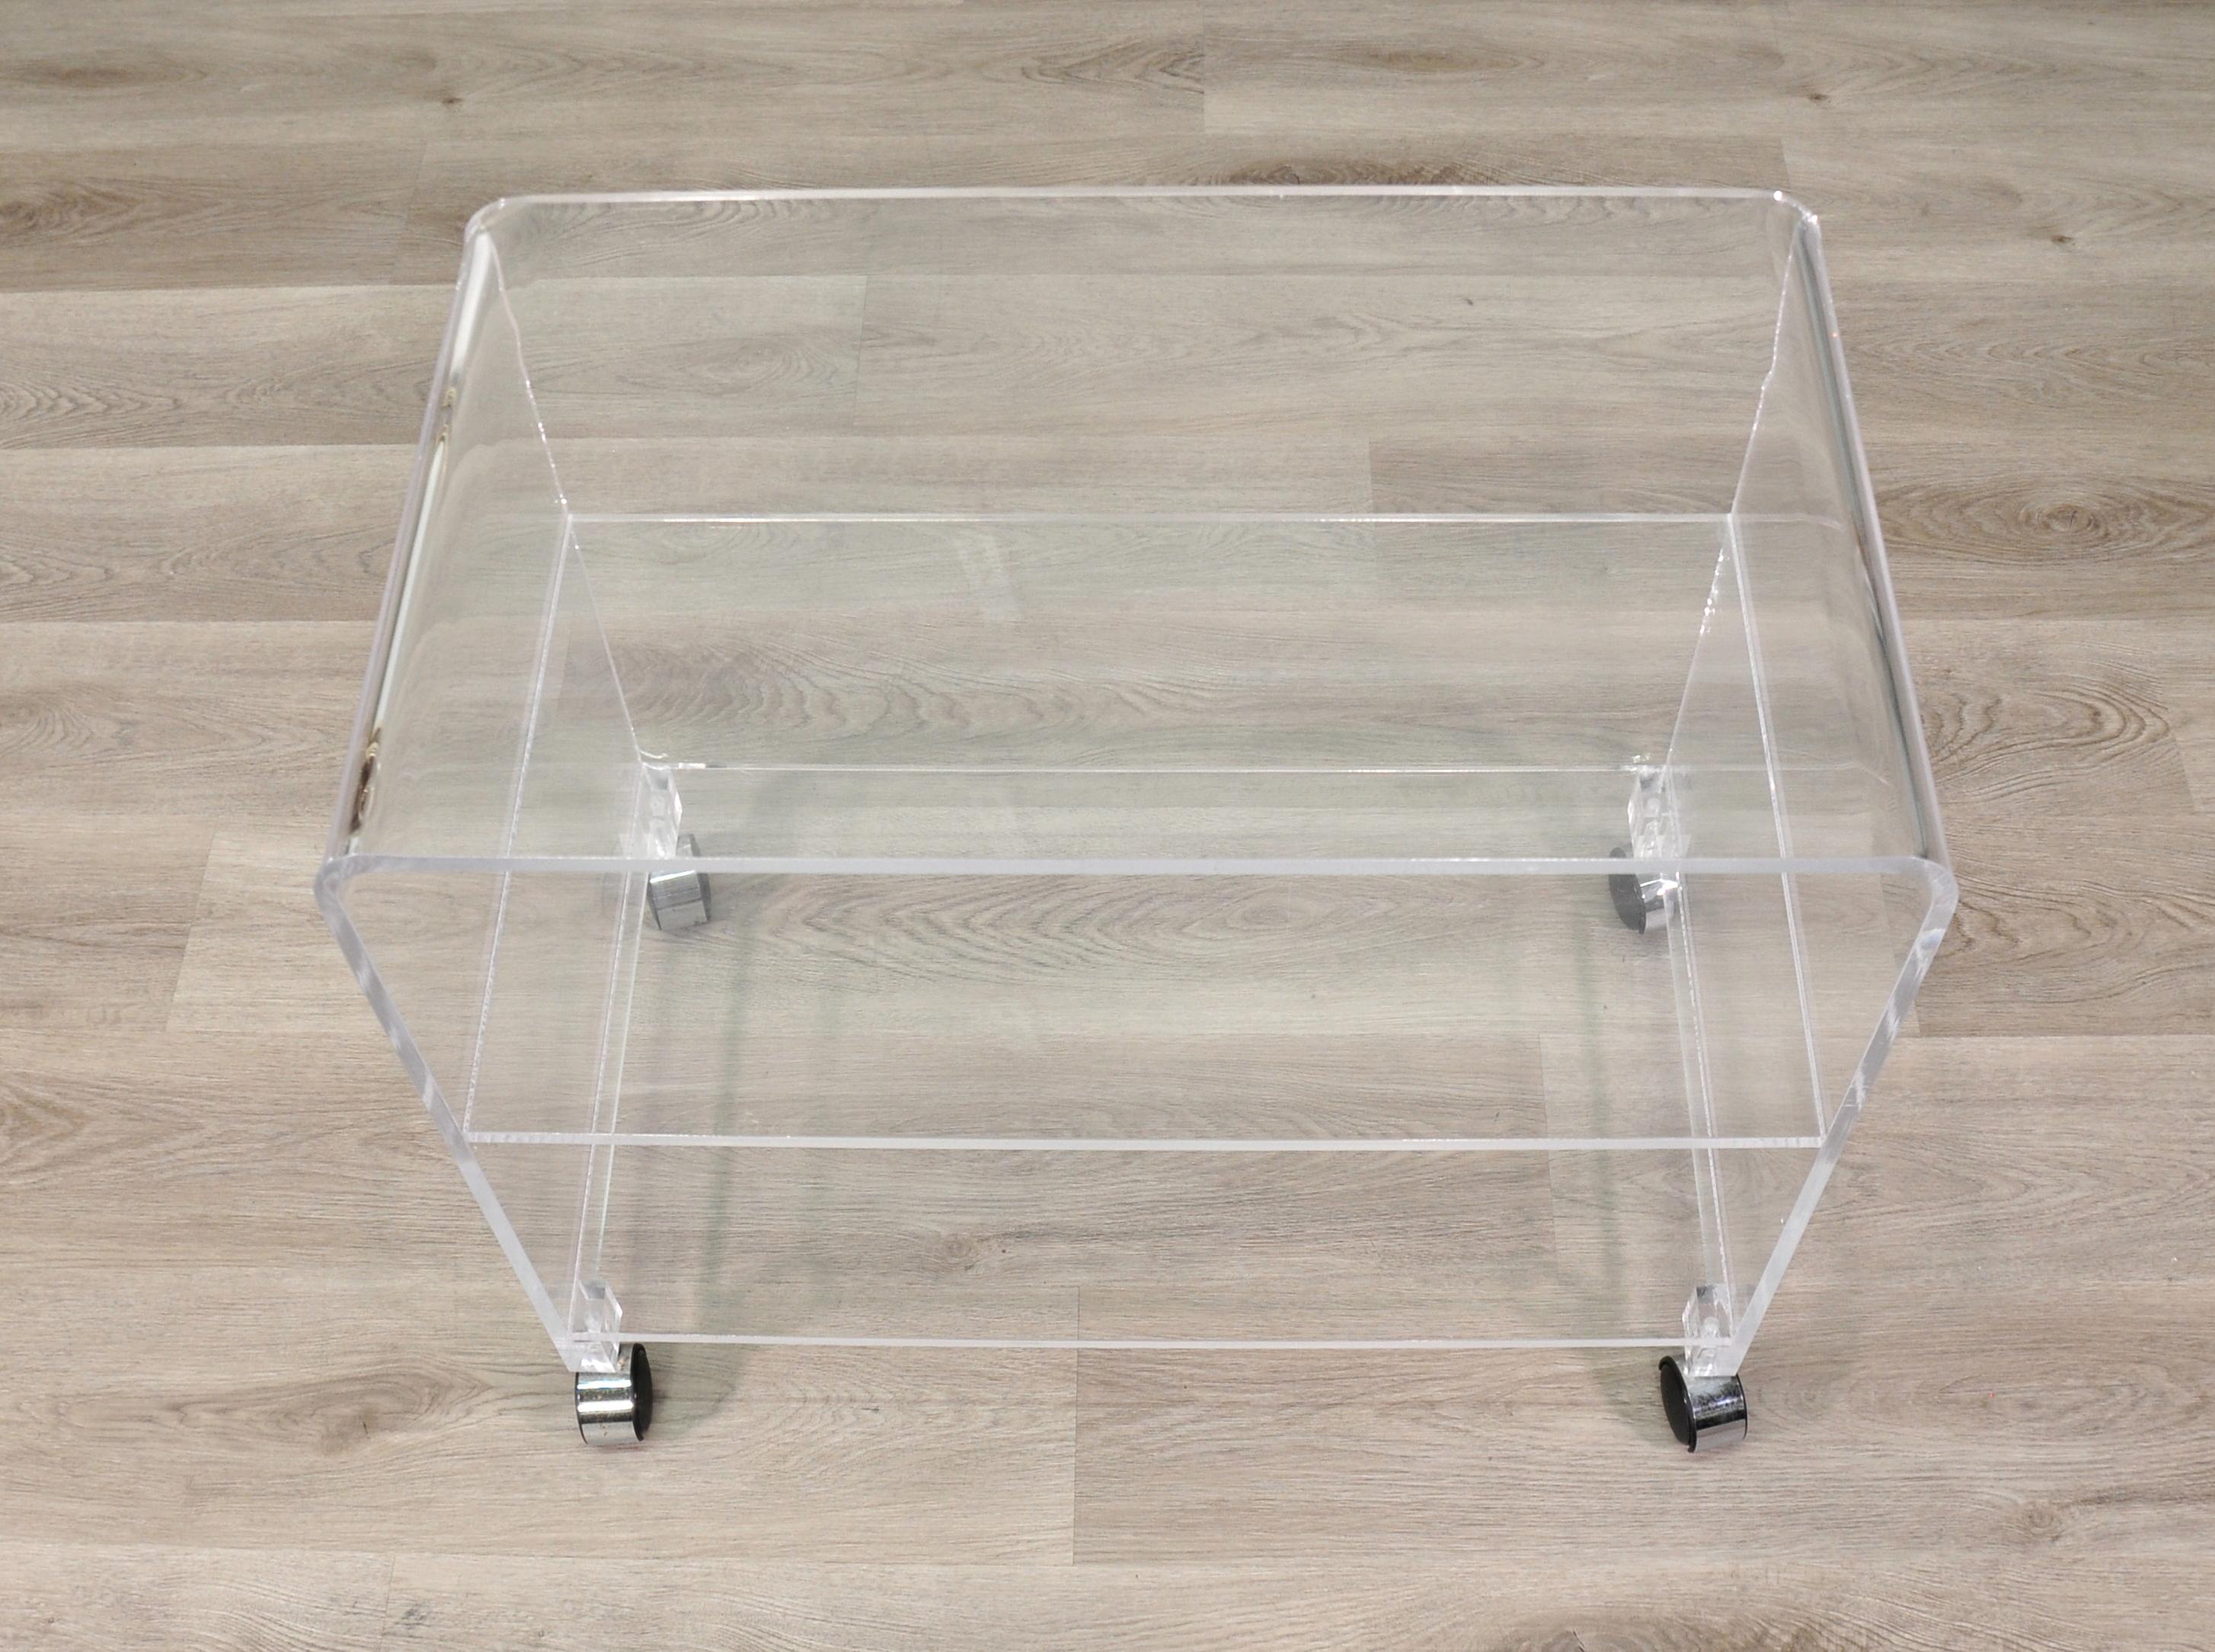 Vintage bar cart or occasional table on wheels, formed of Lucite (clear acrylic) on four easy pull chromed wheels. Waterfall three-tier design with smooth rolling feature. Inquire with Select Modern about local delivery options.